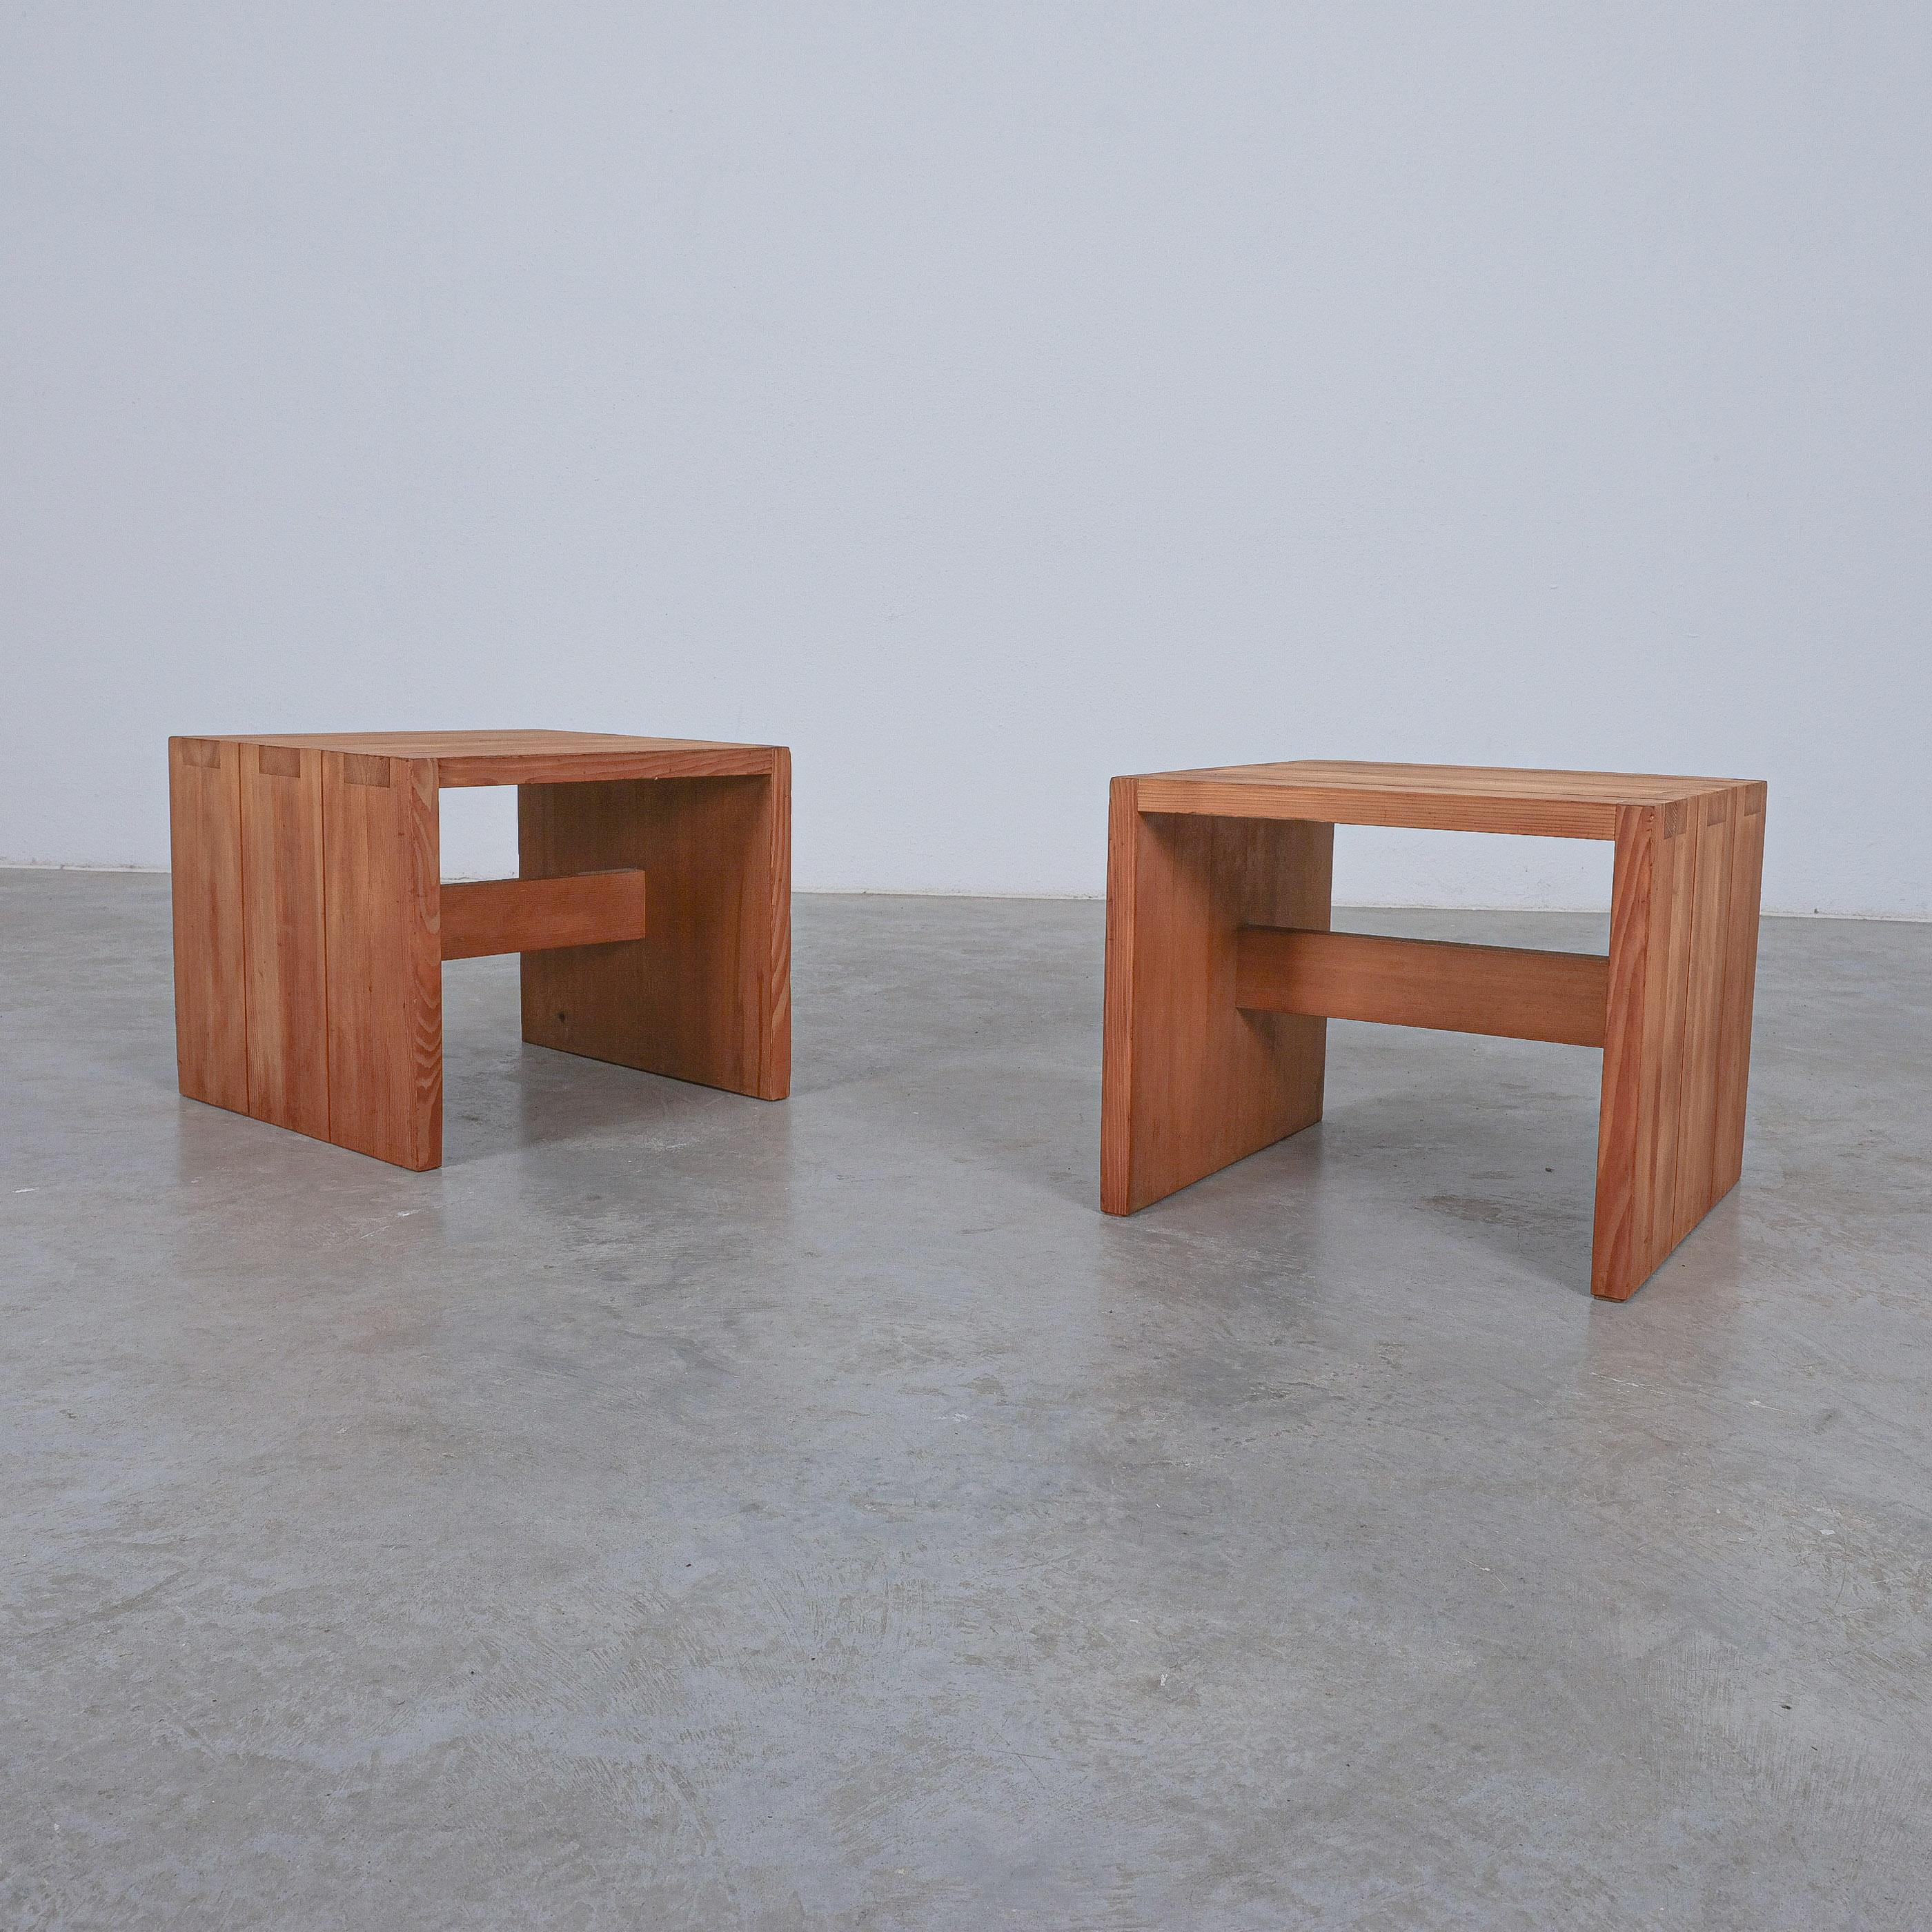 Mid-20th Century Pair of Pine Wood Side Tables Style of Charlotte Perriand, 1960 For Sale